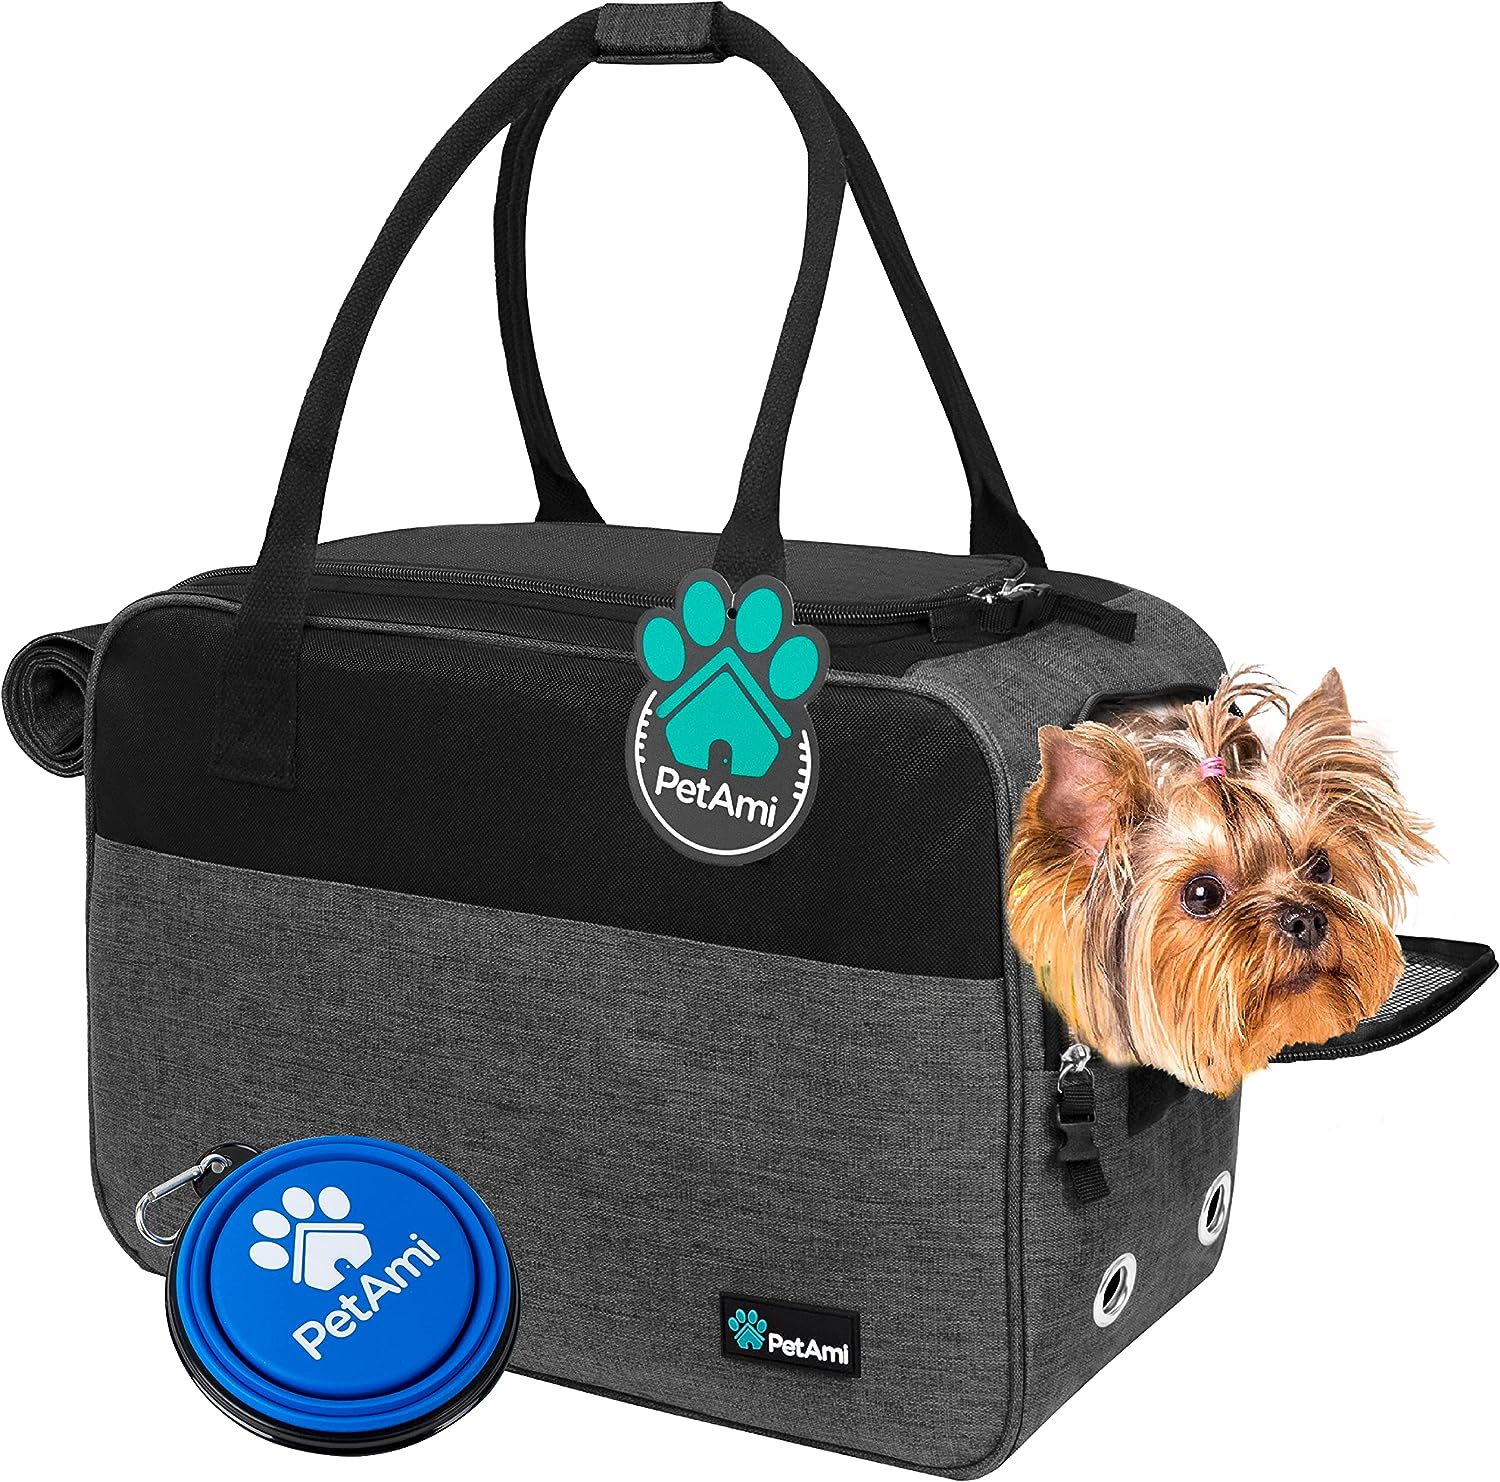 PetAmi Dog Purse Carrier for Small Dogs